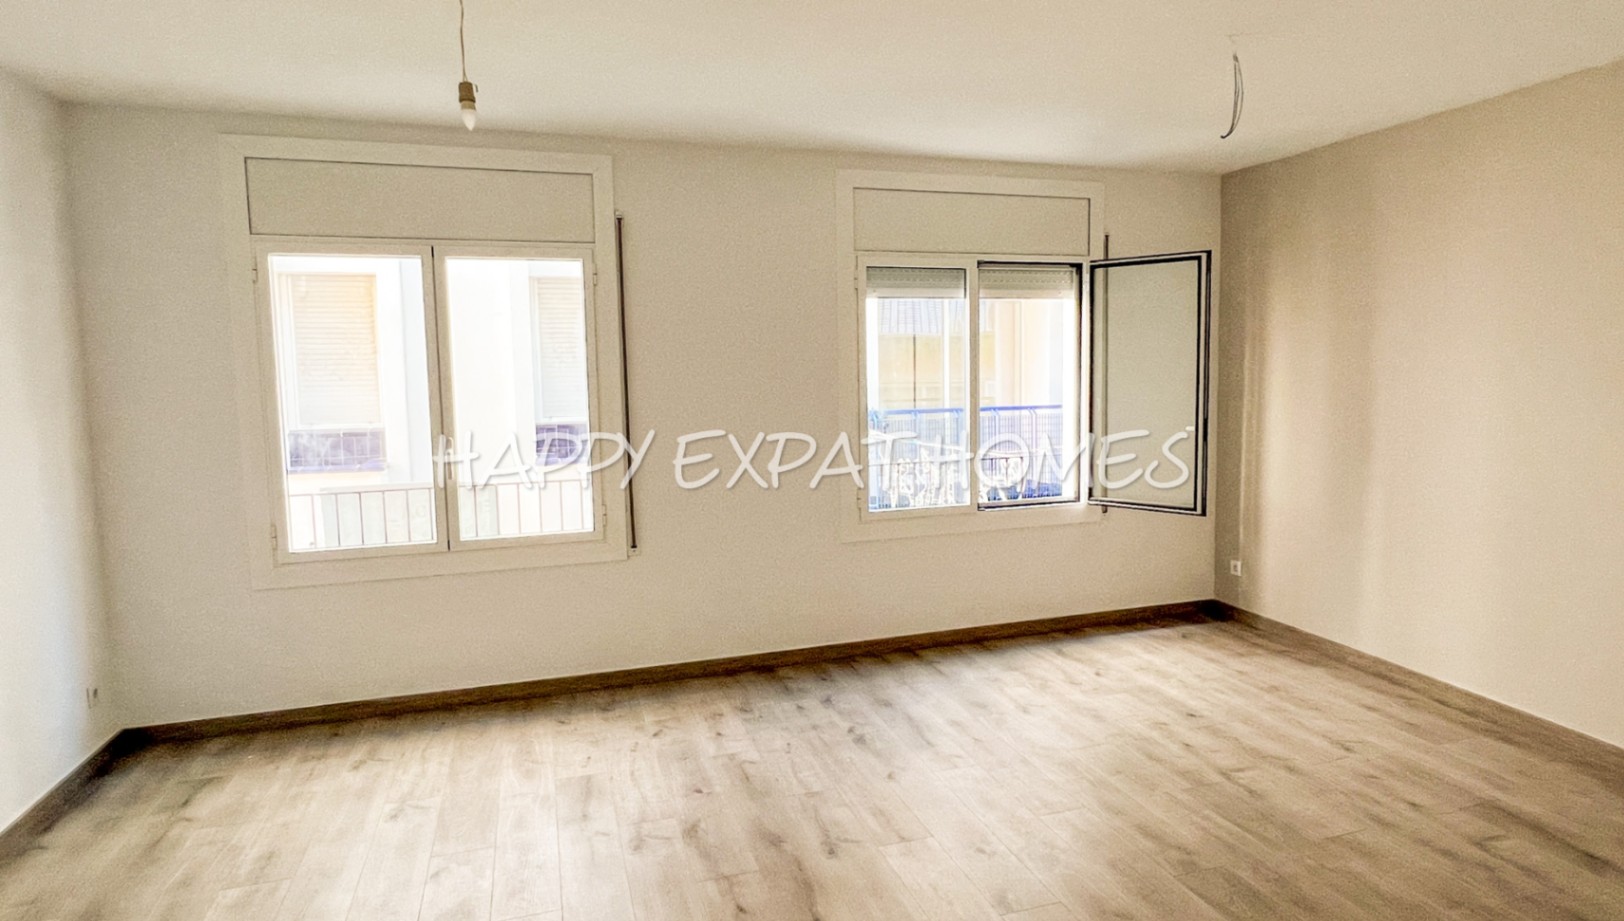 Refurbished flat in Paseo Maritimo - Sitges